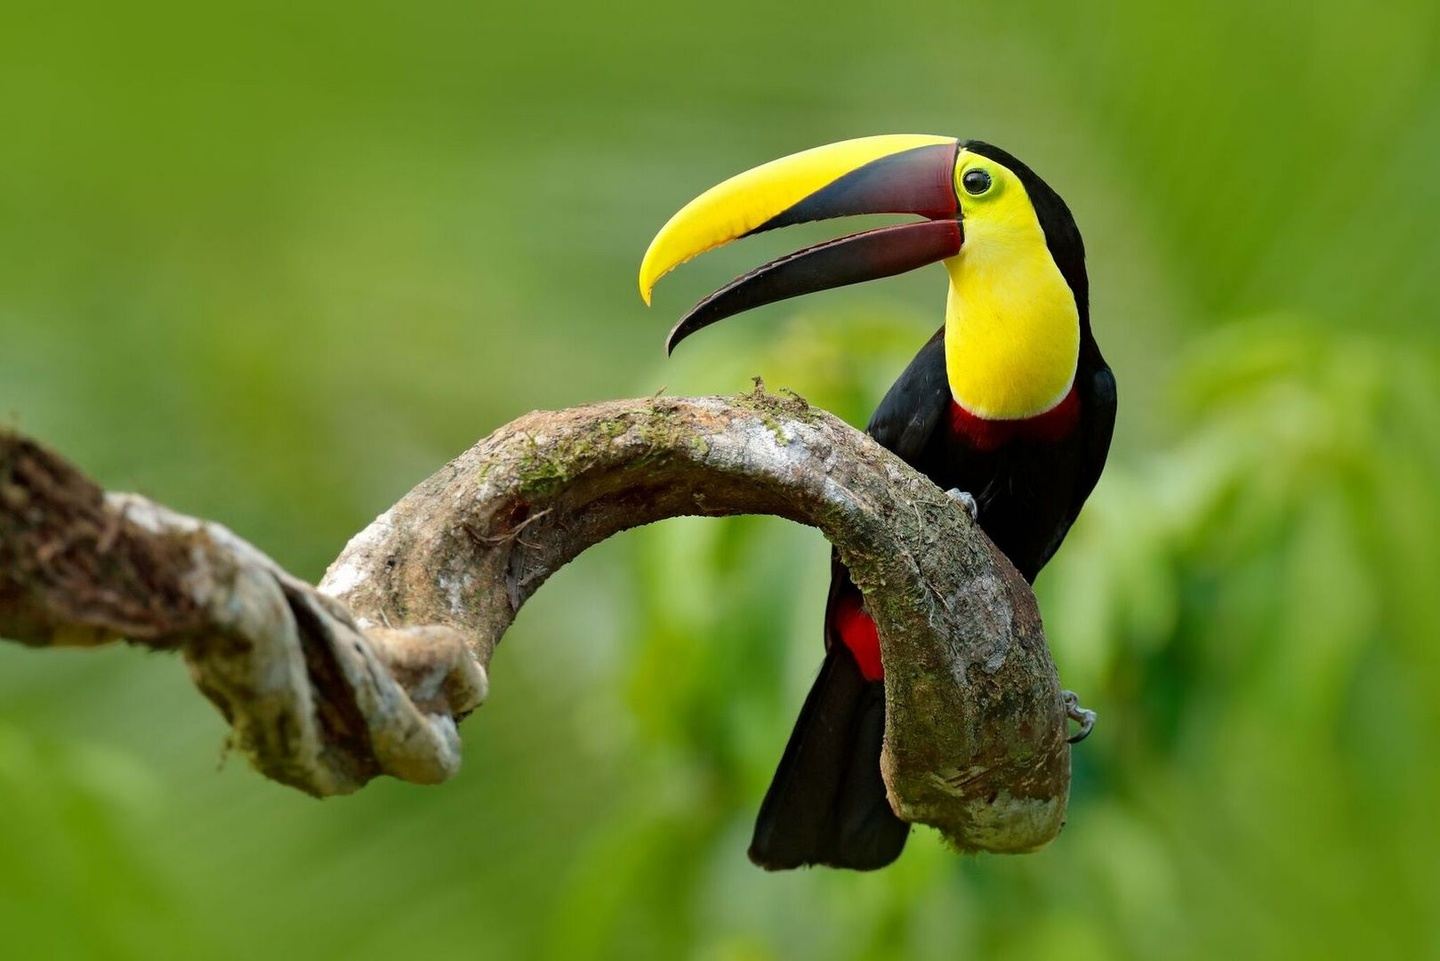 Birding Costa Rica from coasts to cloud forests